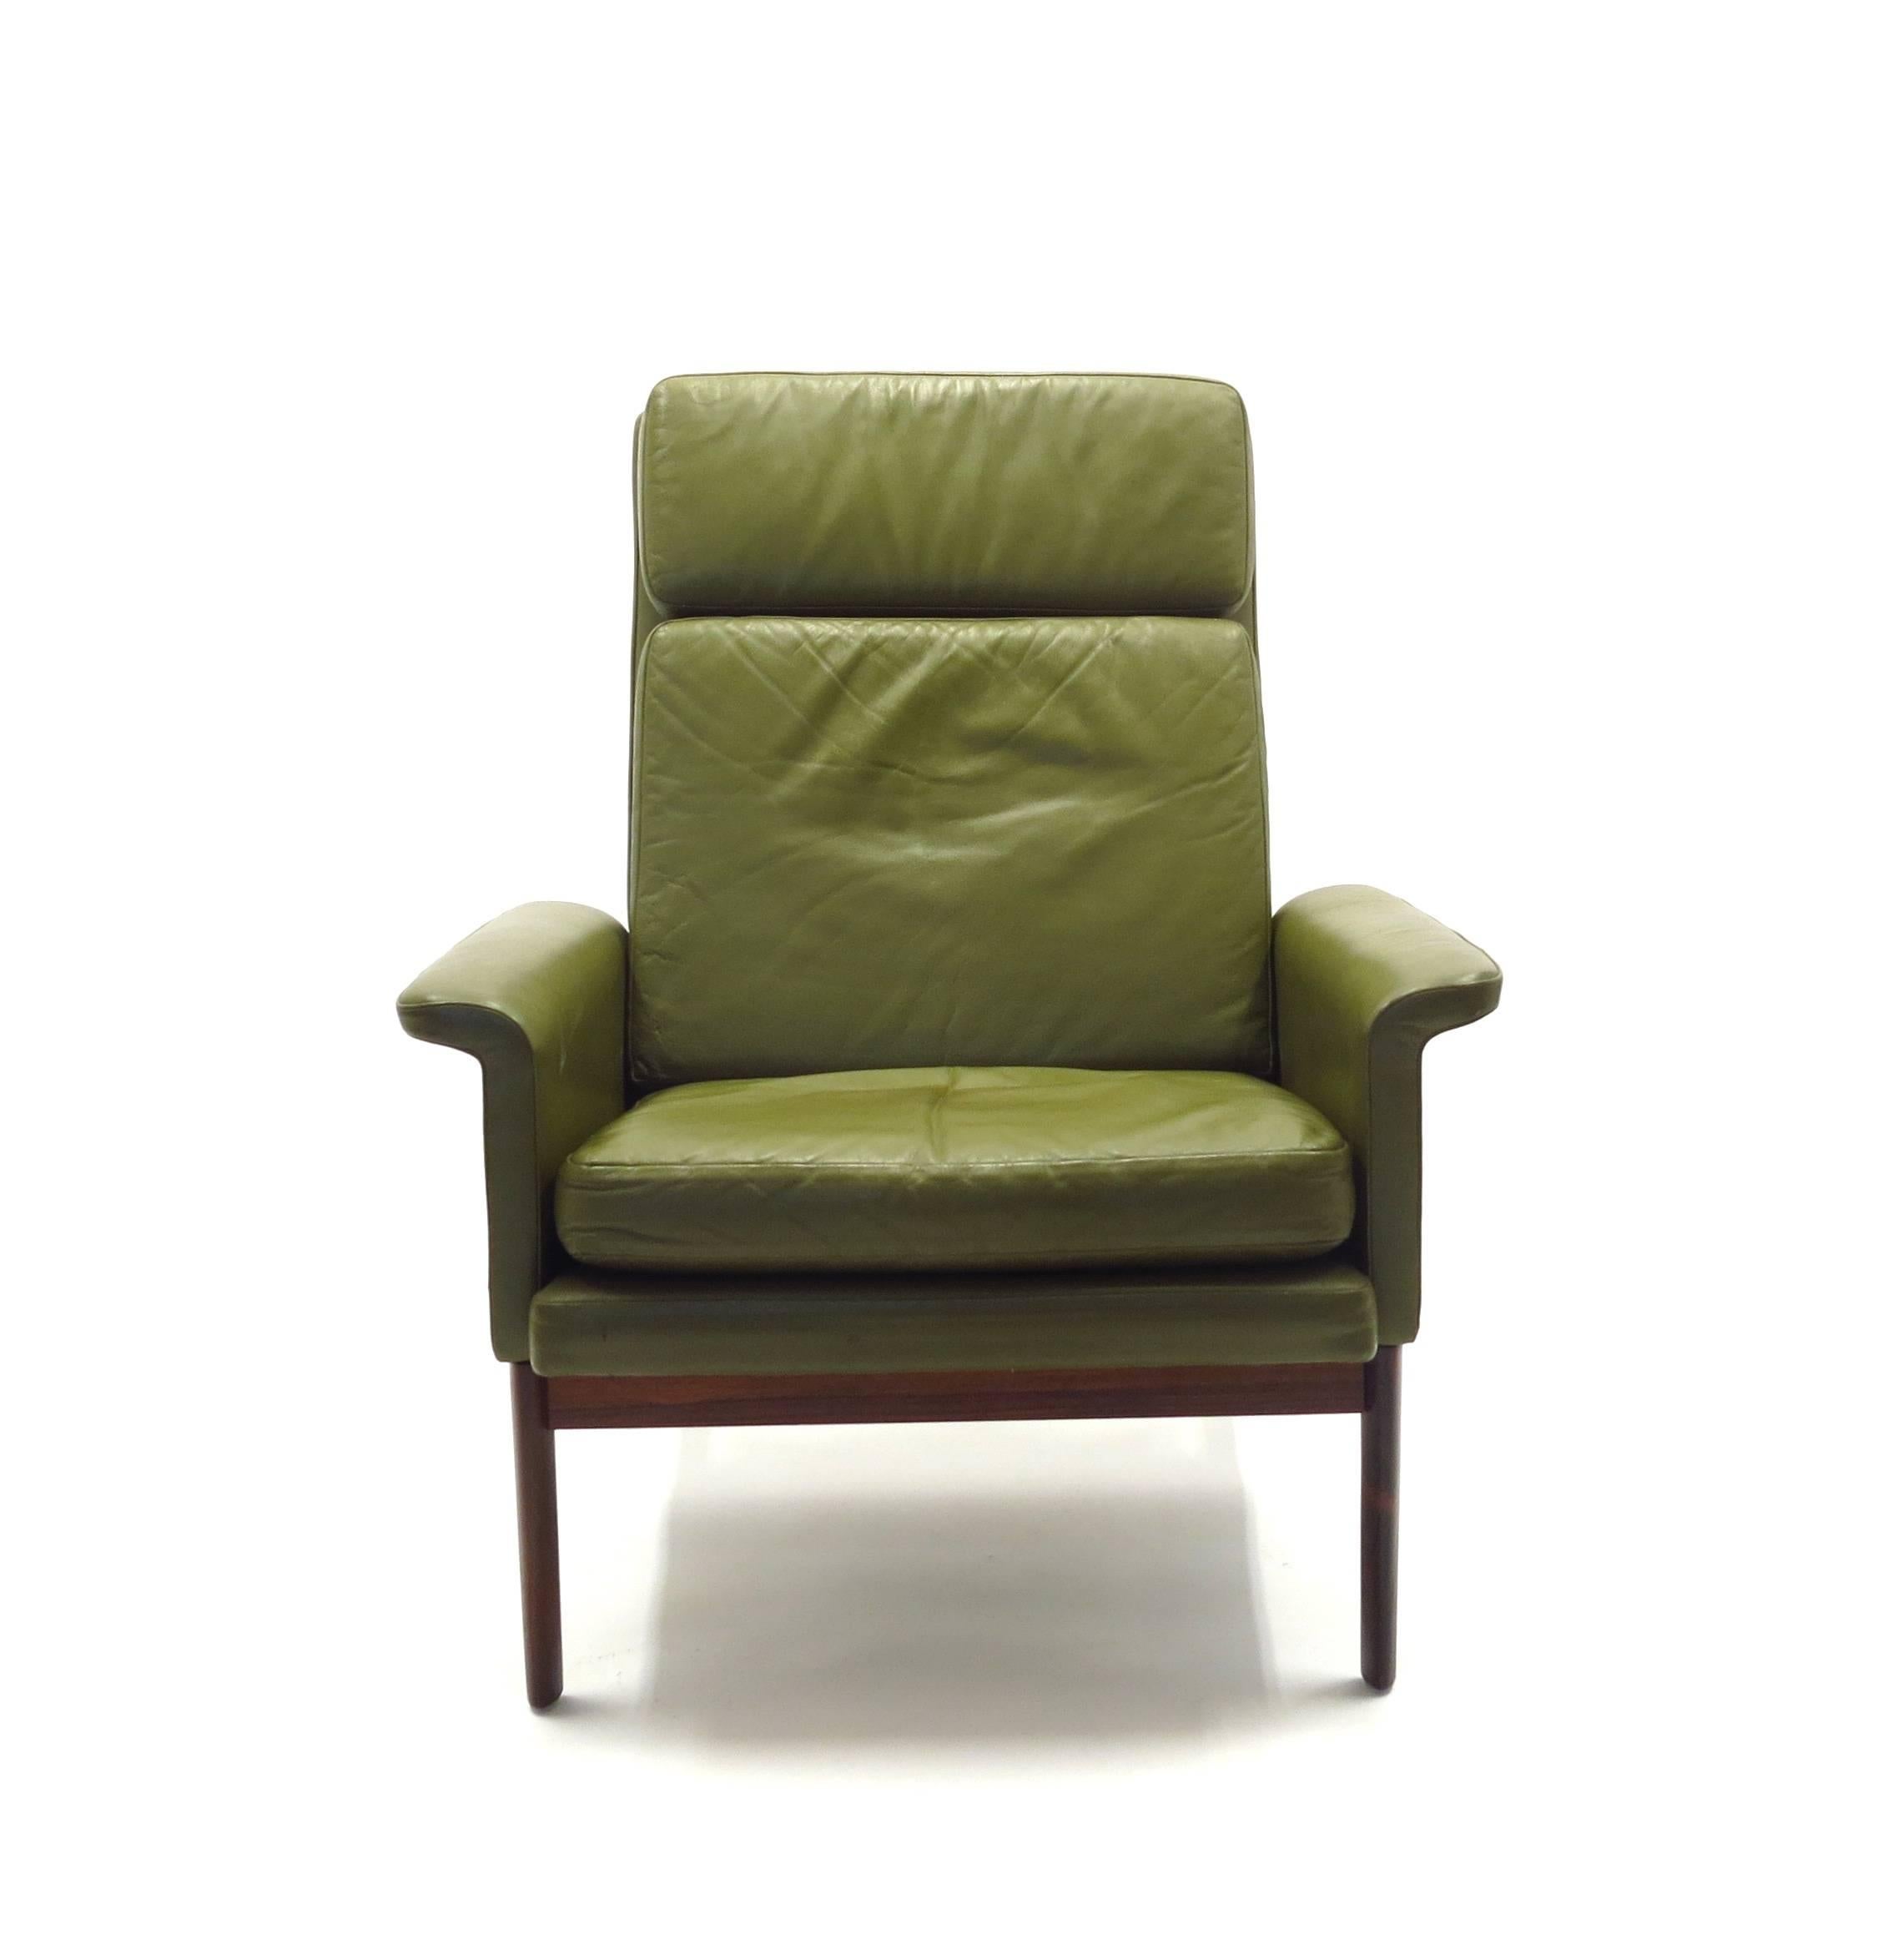 High back version of Finn Juhl's classic lounge chair, model Jupiter in rosewood and green leather, produced by Danish manufacturer France & Søn. Makes by maker. Very good original vintage condition with light wear.